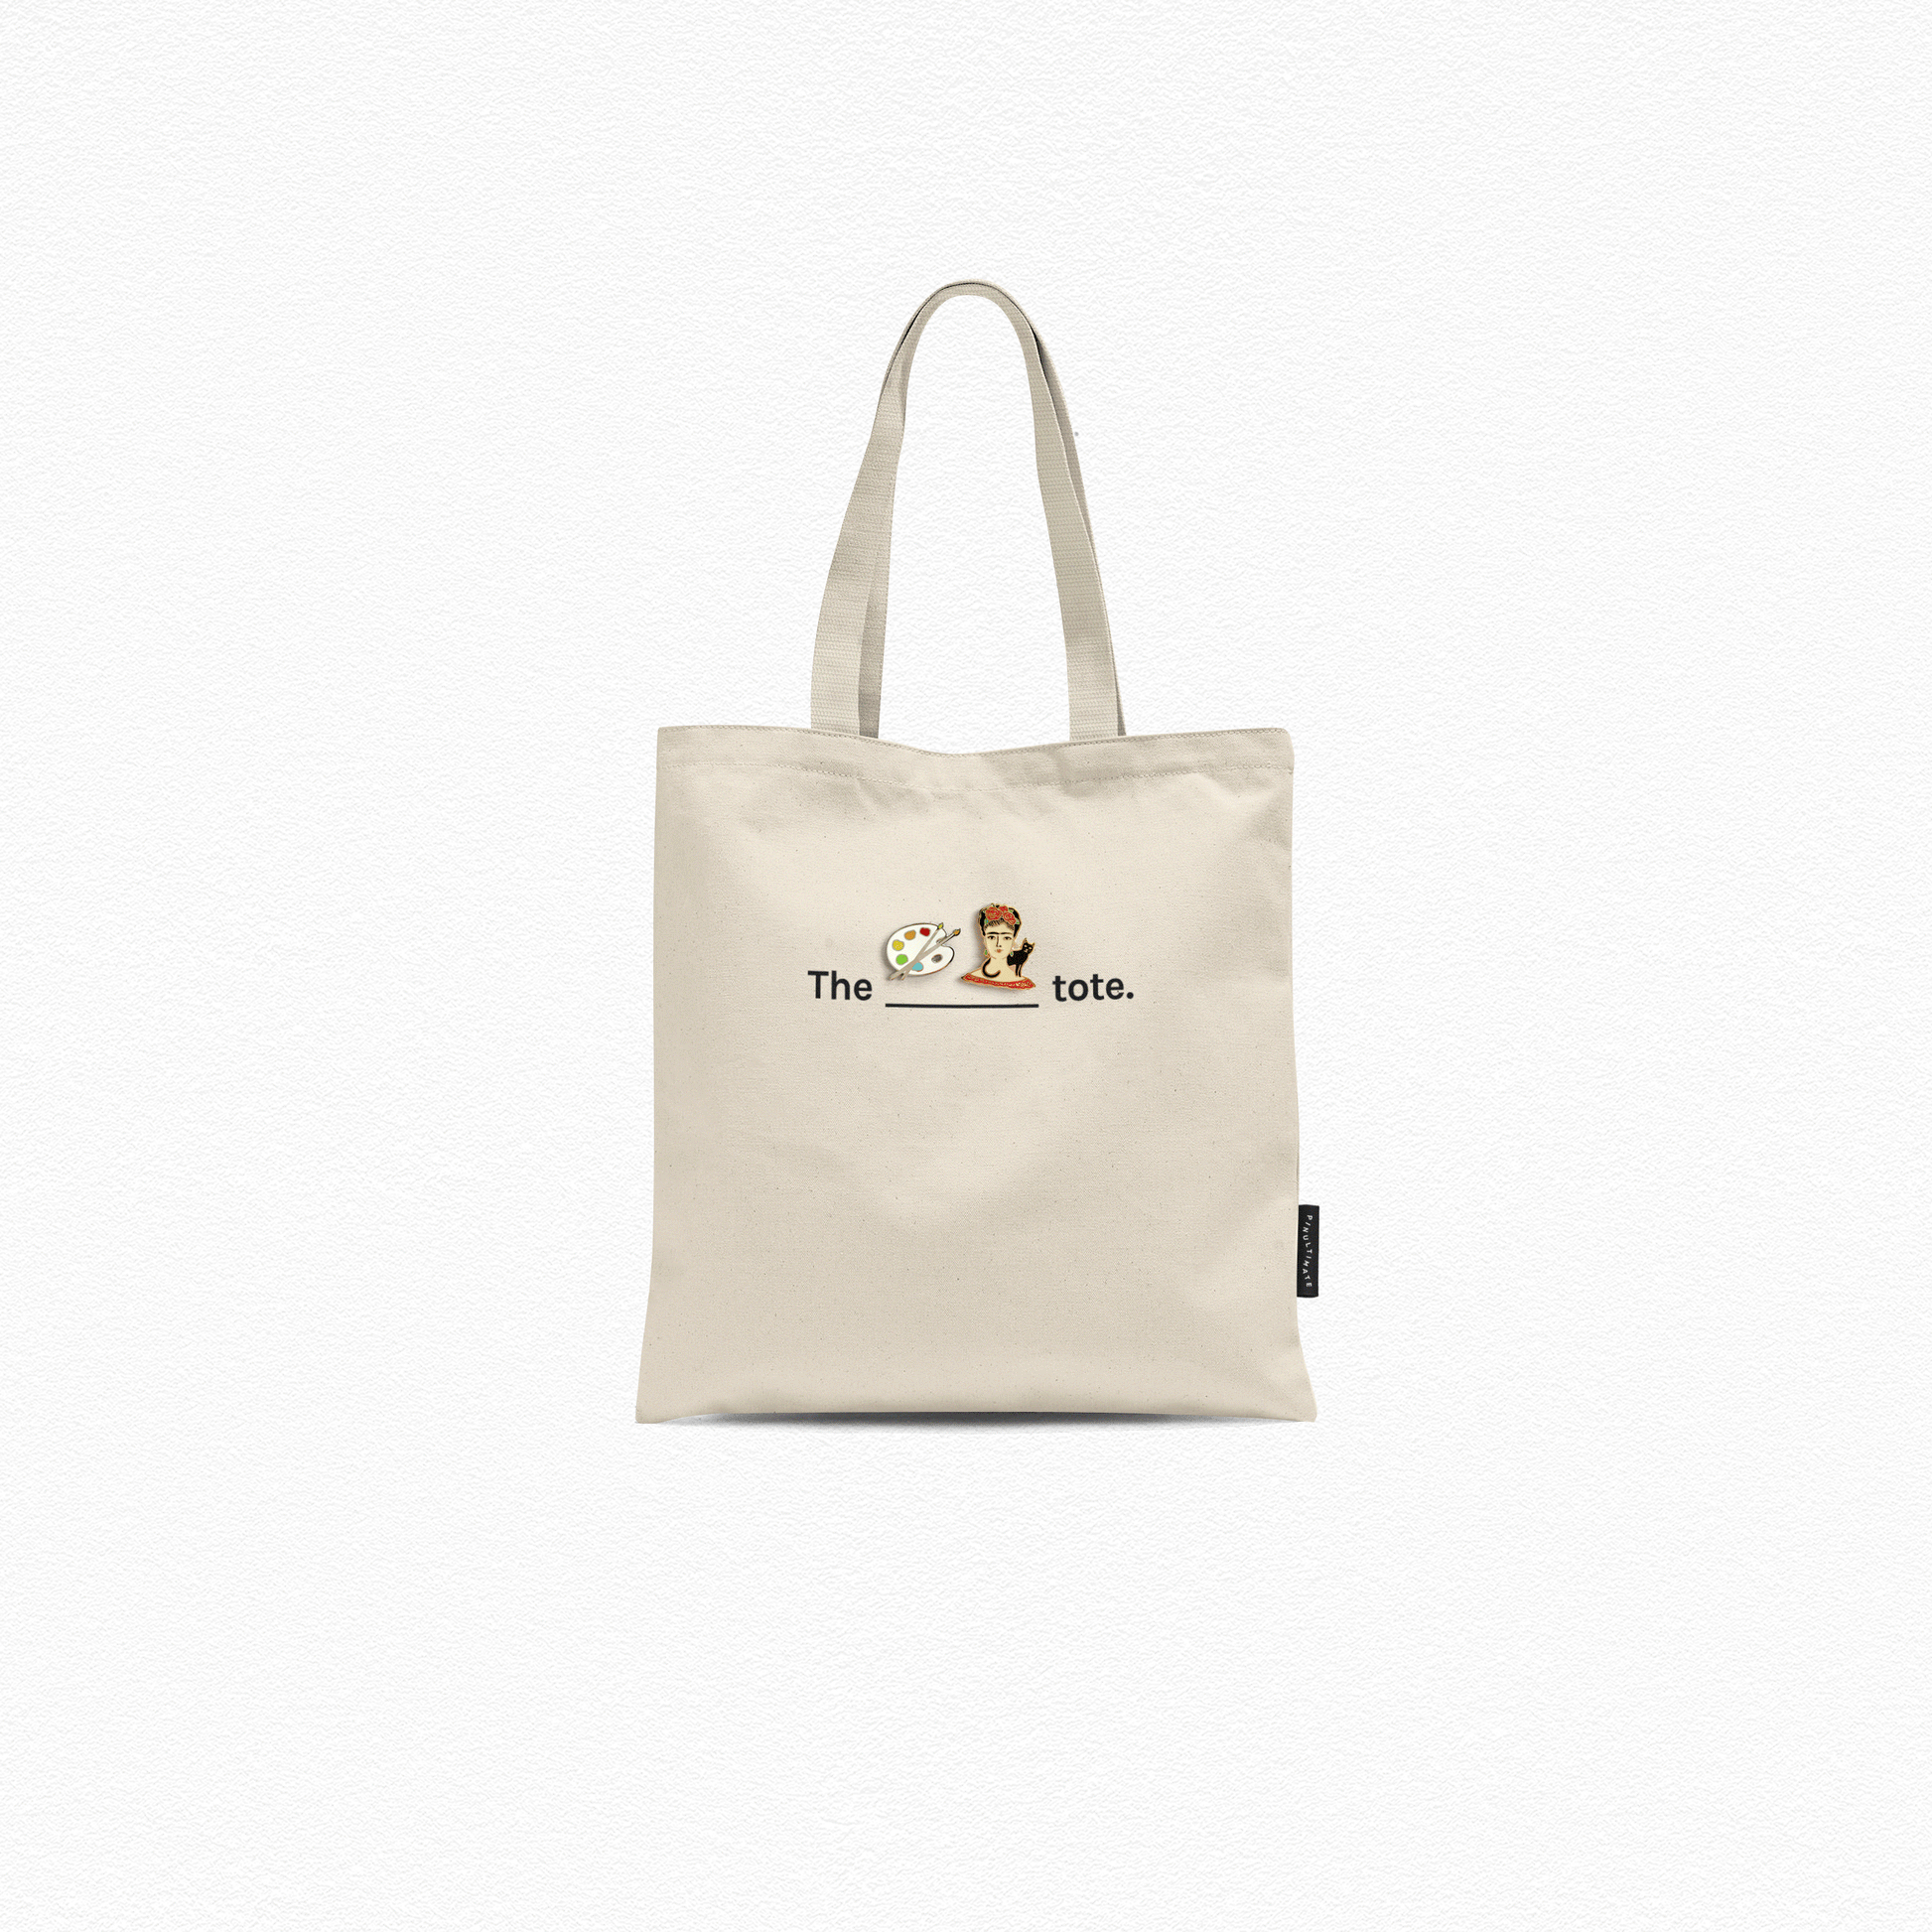 Pin on Bags & Co.